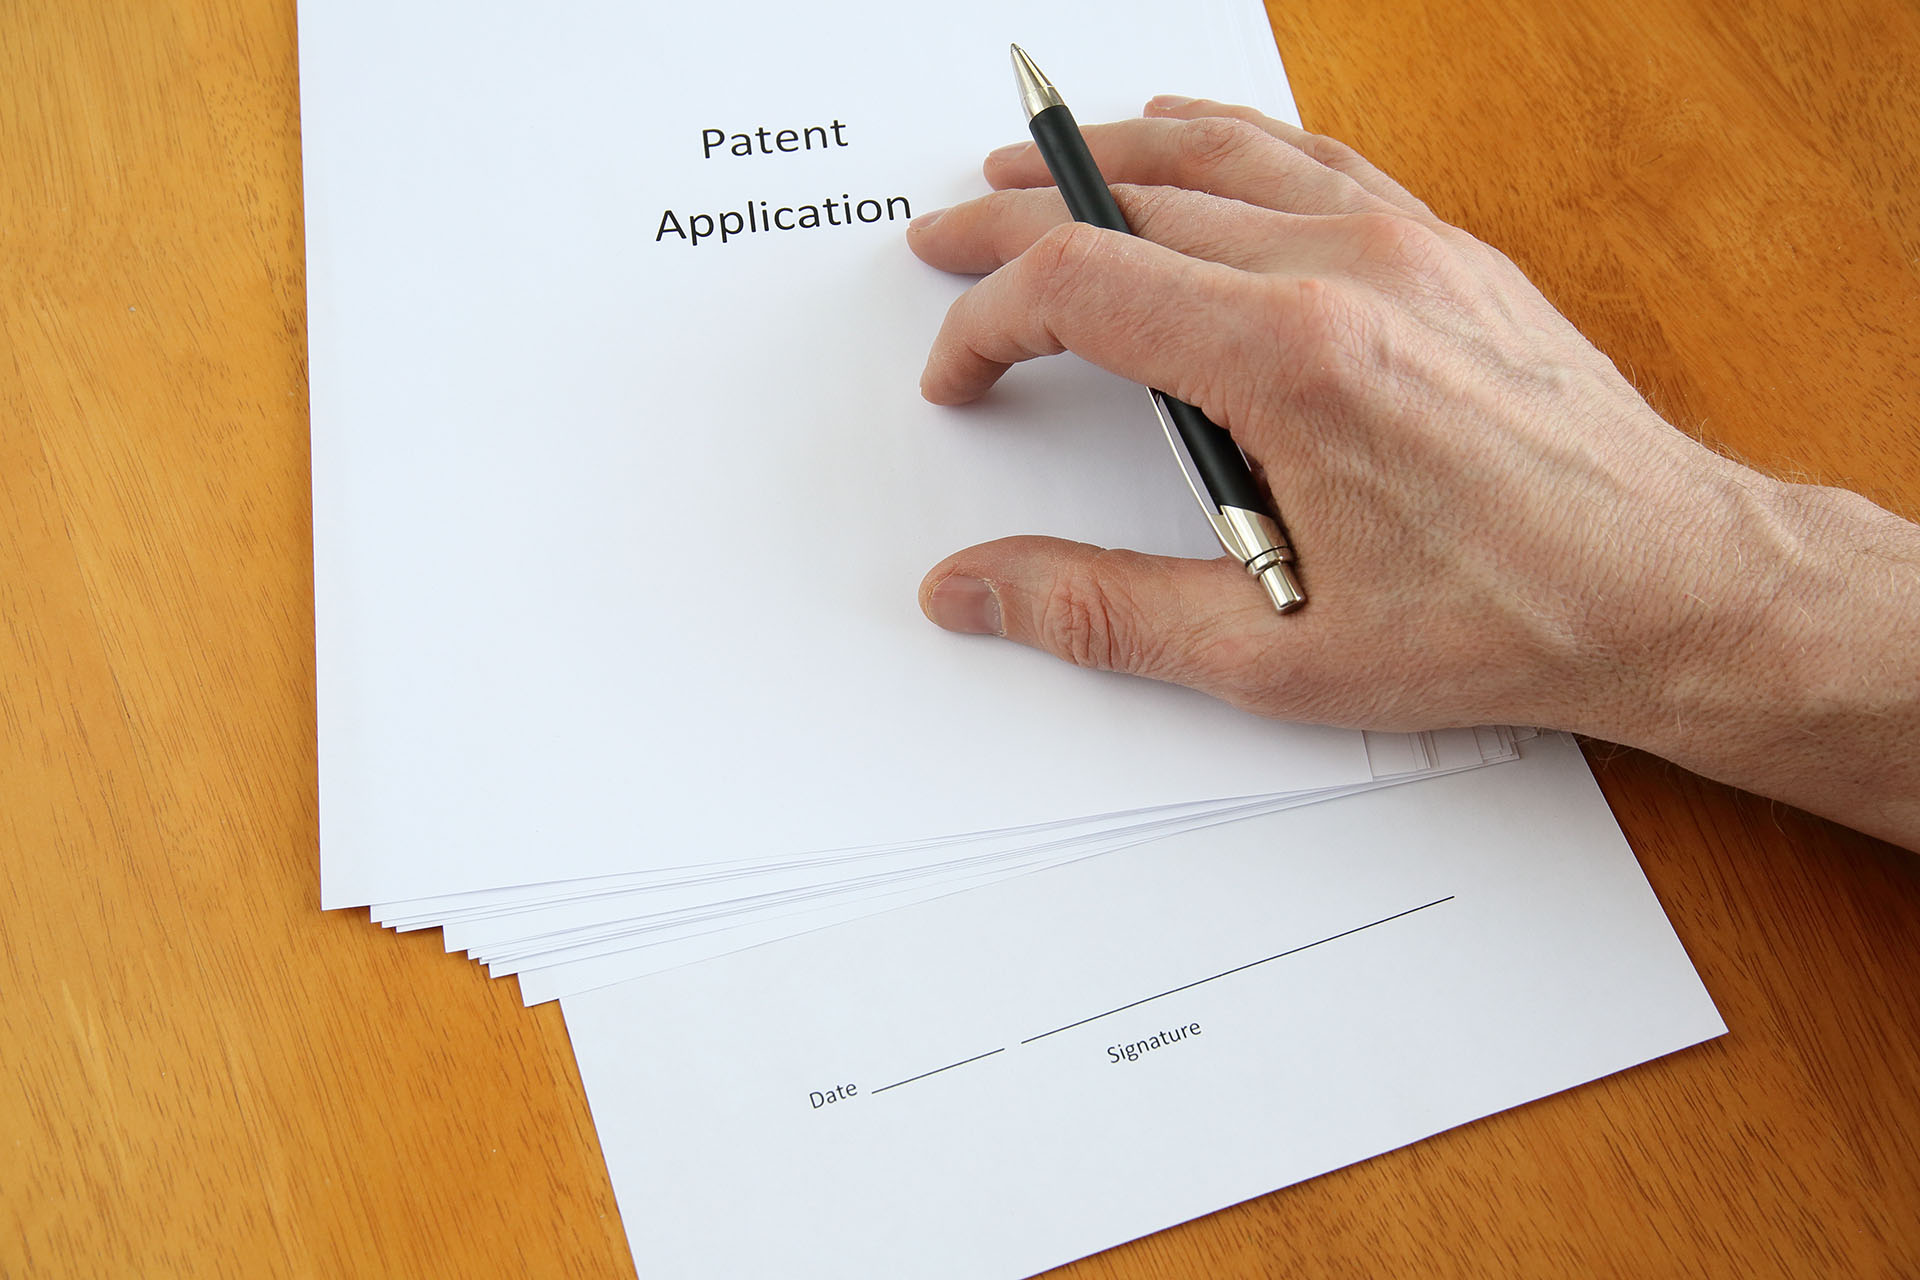 What are the parts of a patent application